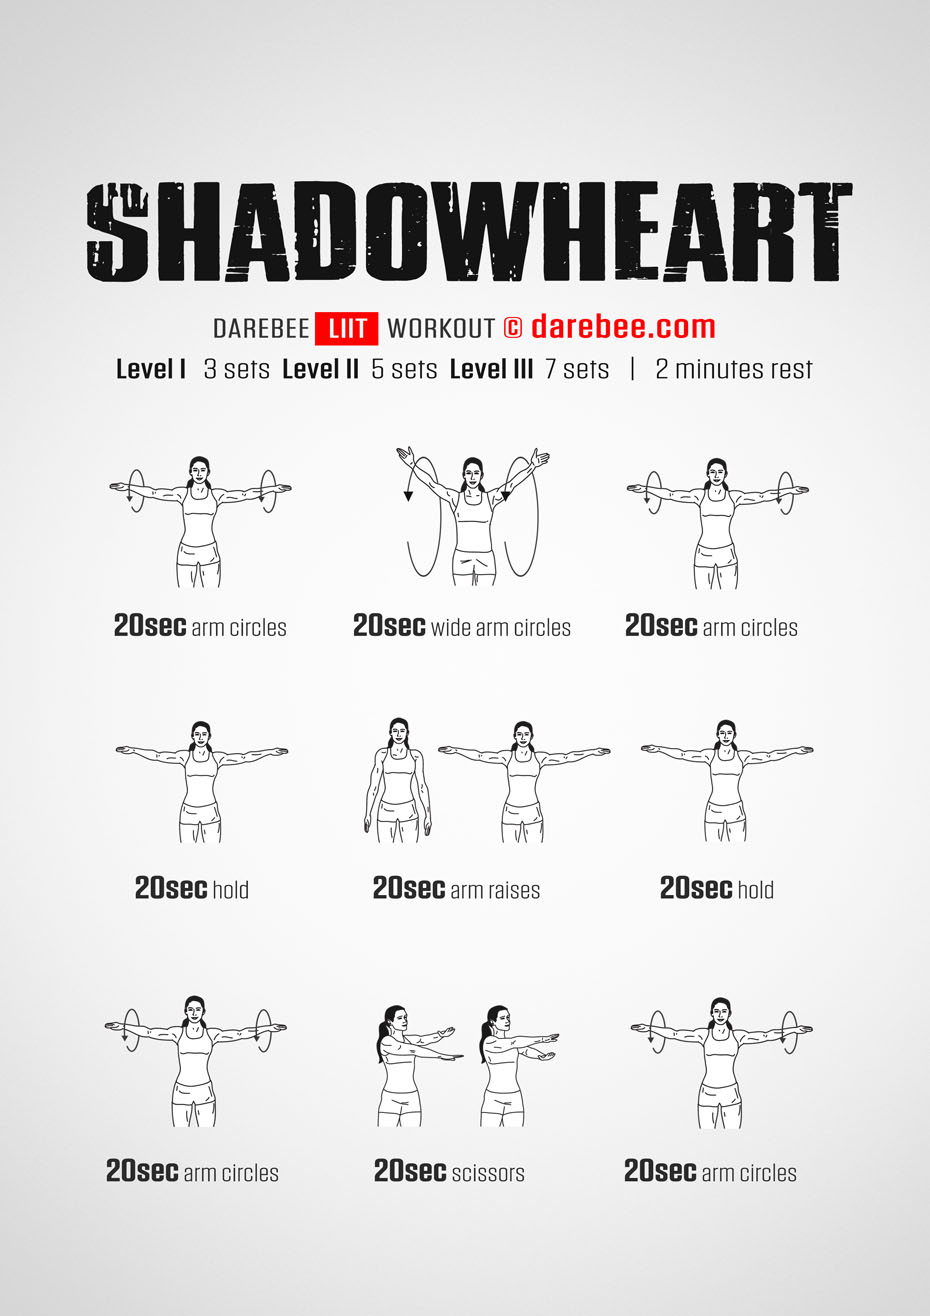 Shadowheart is a Darebee home-fitness Low Intensity Interval Training (LIIT) workout that helps you get fit without putting a strain on your joints.